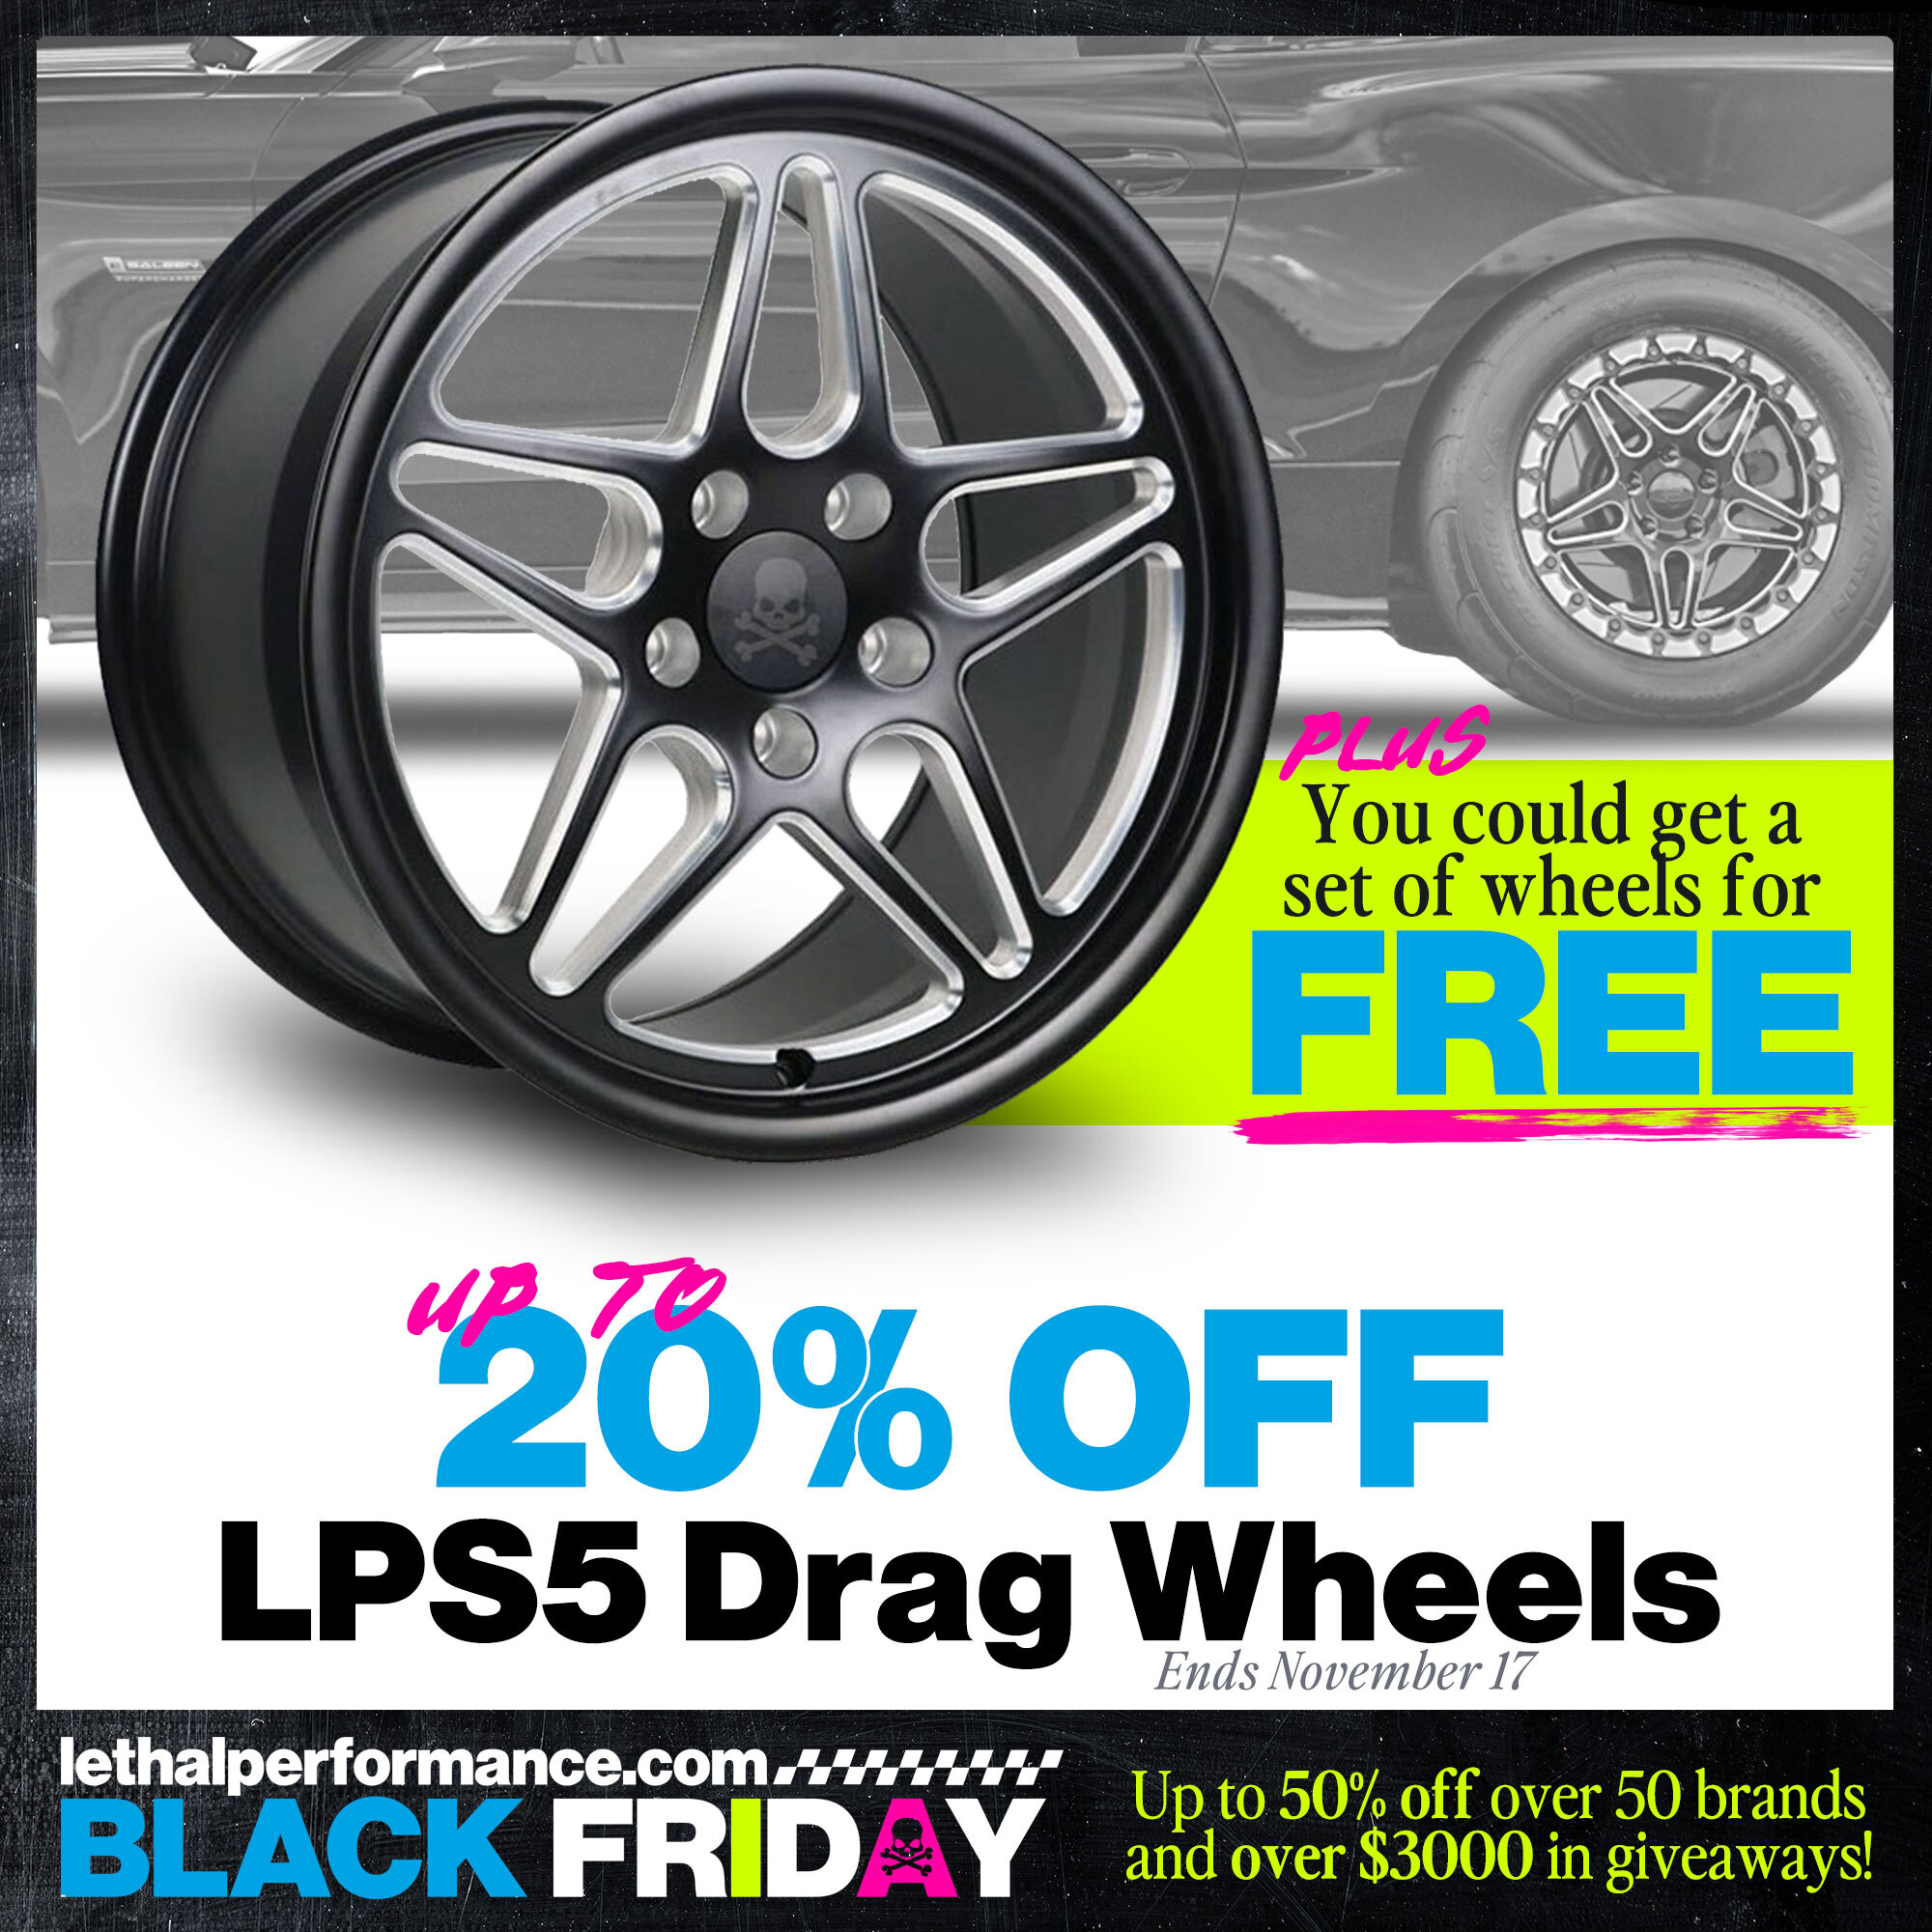 S650 Mustang Black Friday starts NOW! Up to 50% off! lps5_withgiveaway